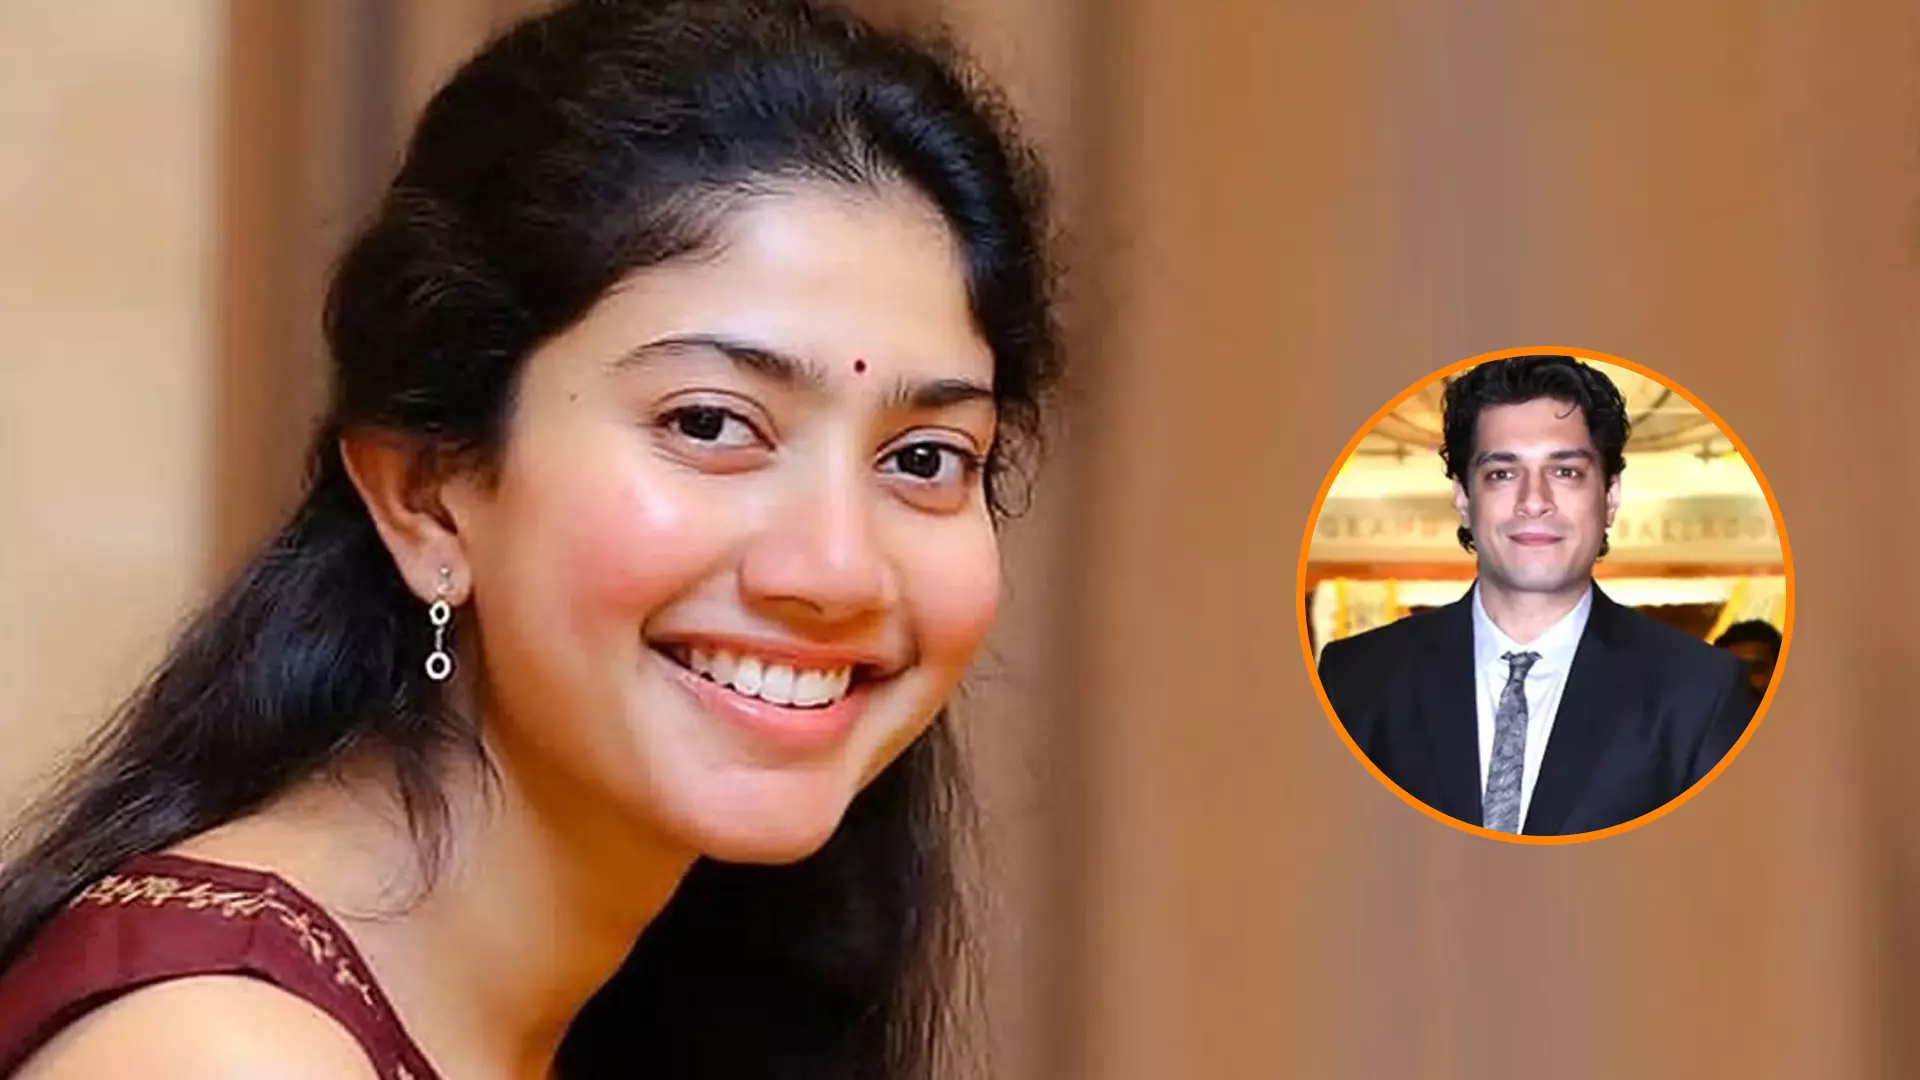 Sai Pallavi with Aamir Khans son, and some more odd film pairings